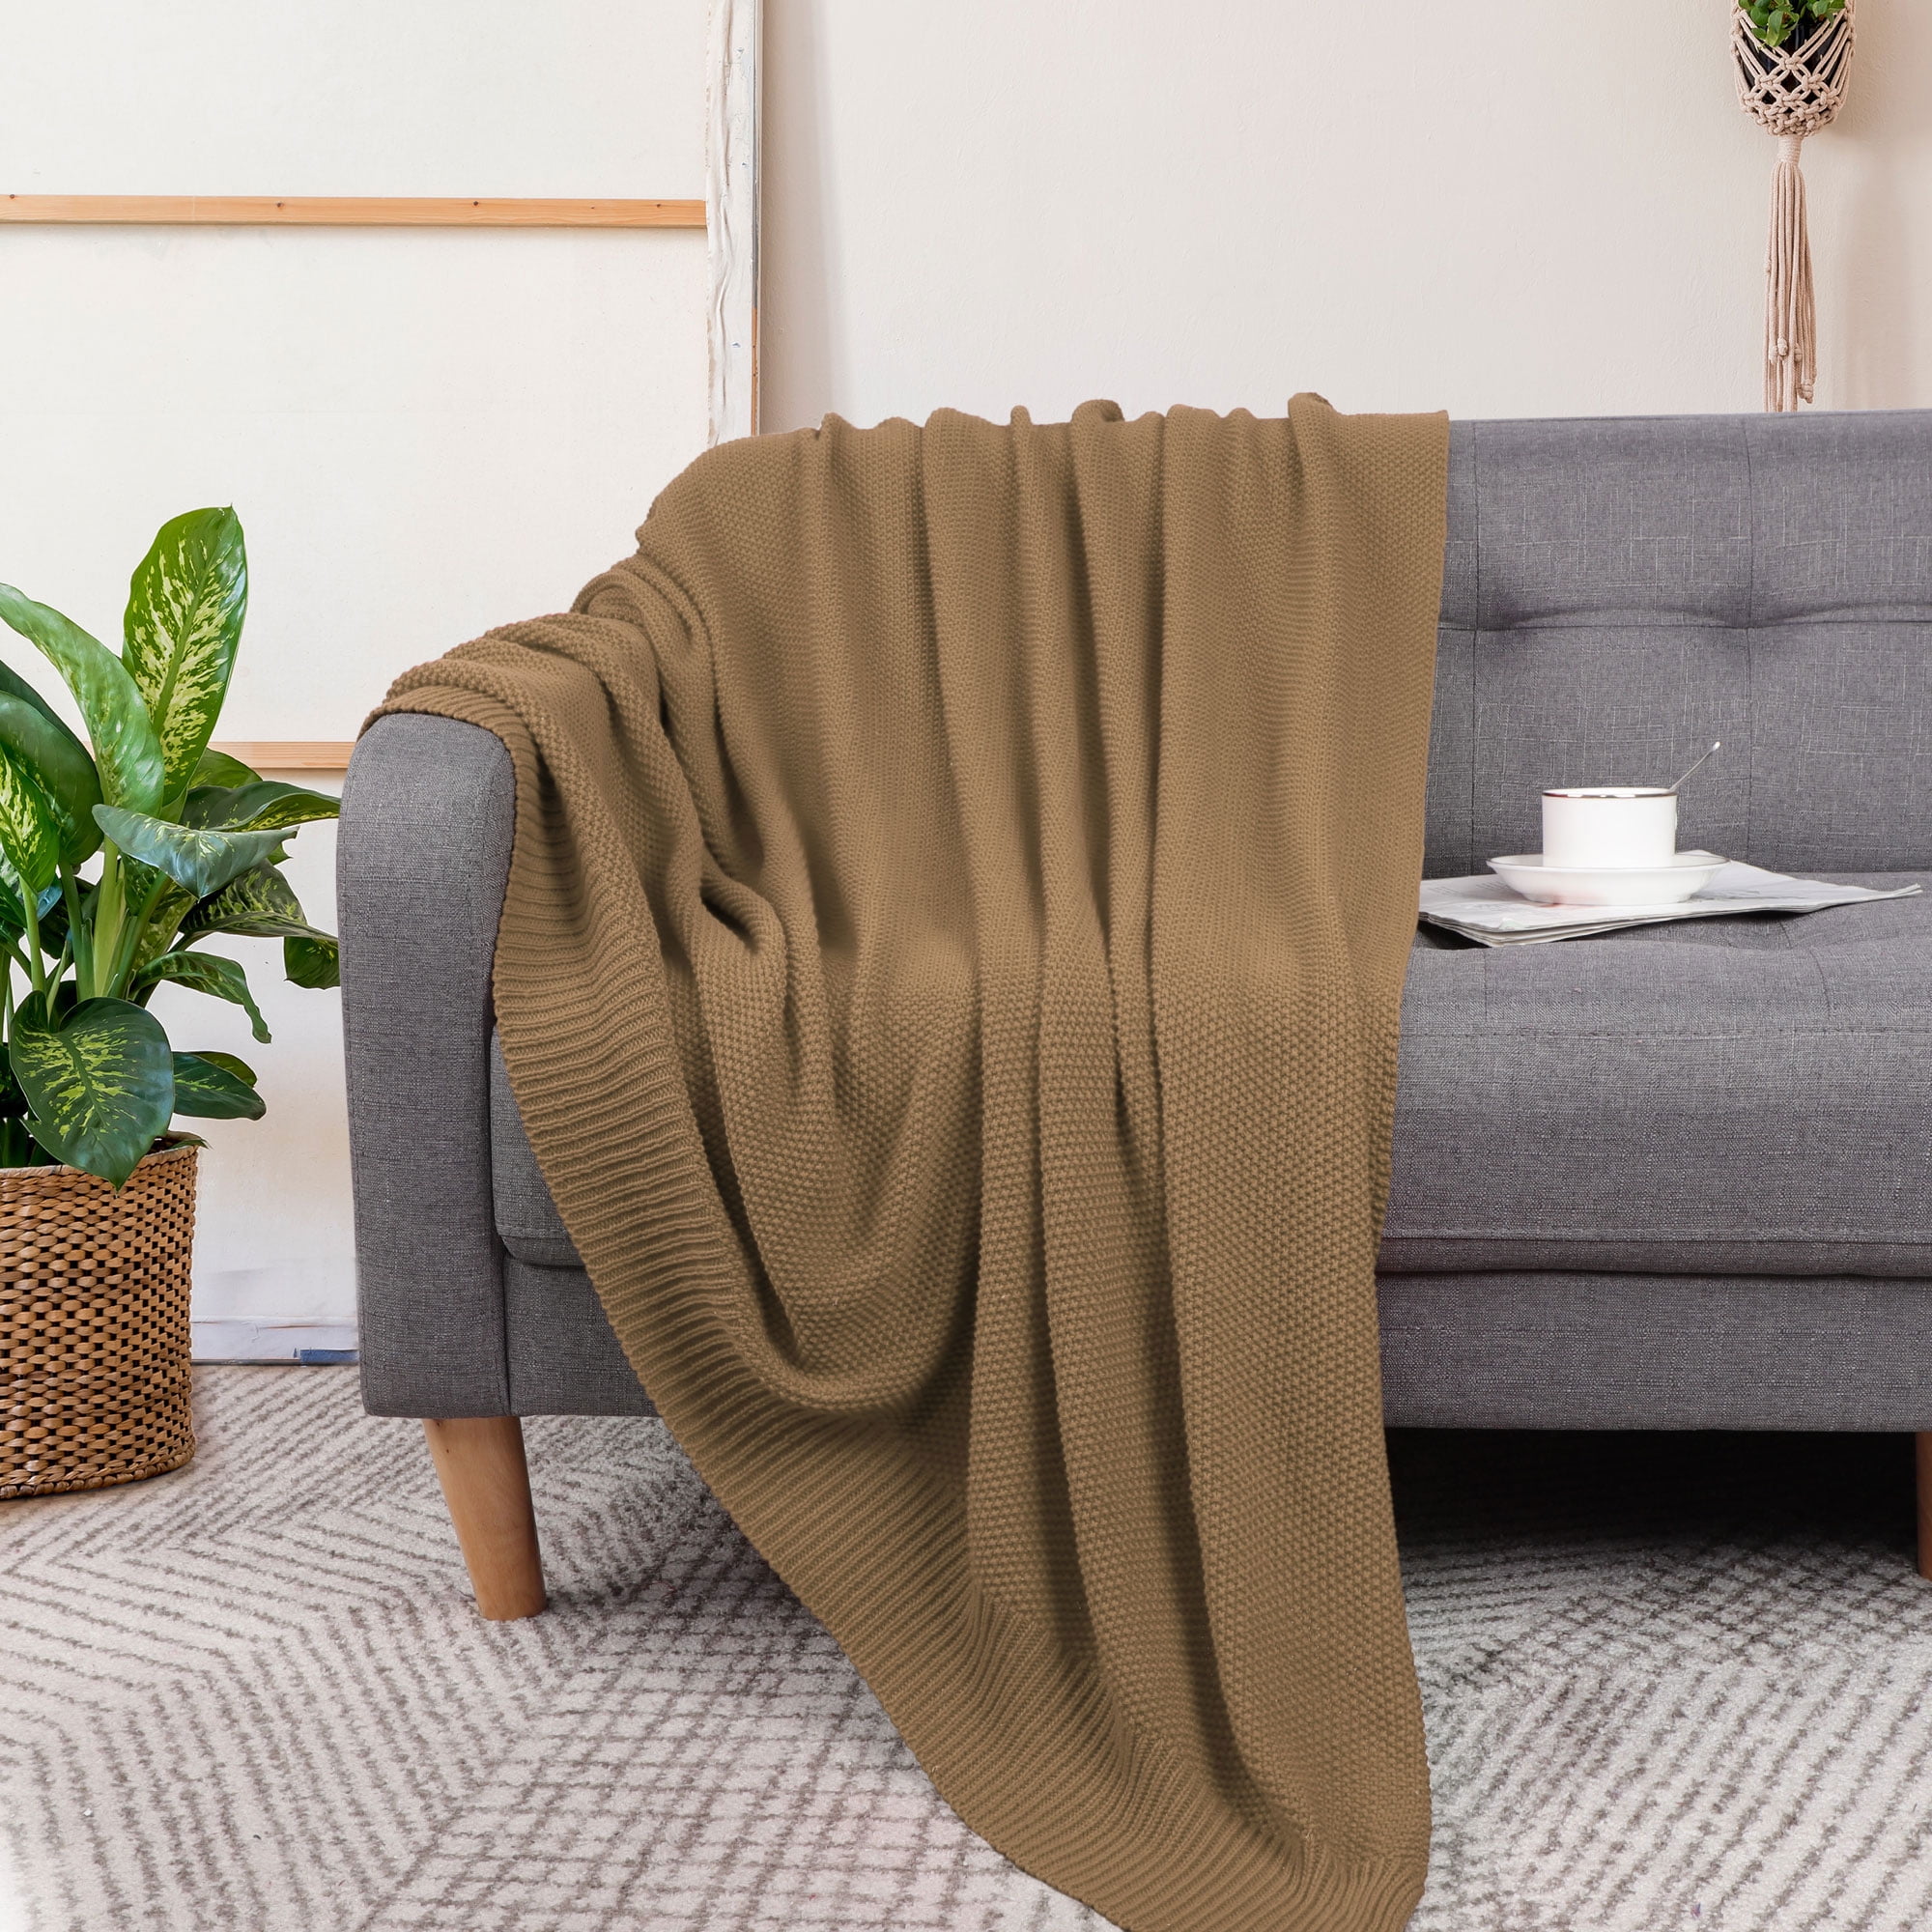 100% Cotton Soft Knit Throw Blanket for Sofa Home Decor 50x60,Coffee Color  Bedding for Home 